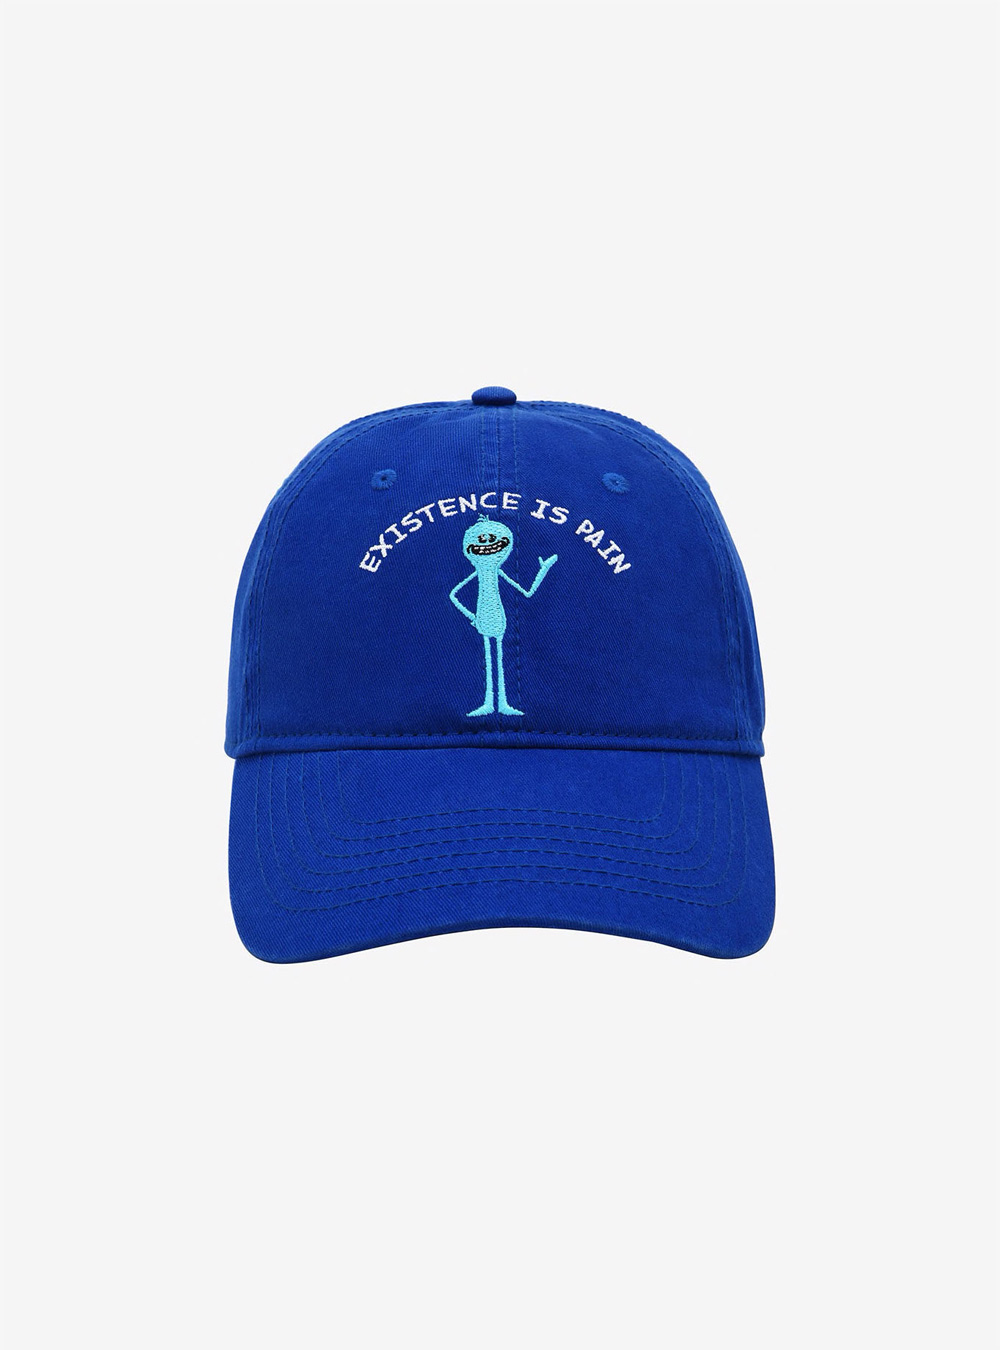 Existence is Pain Cap